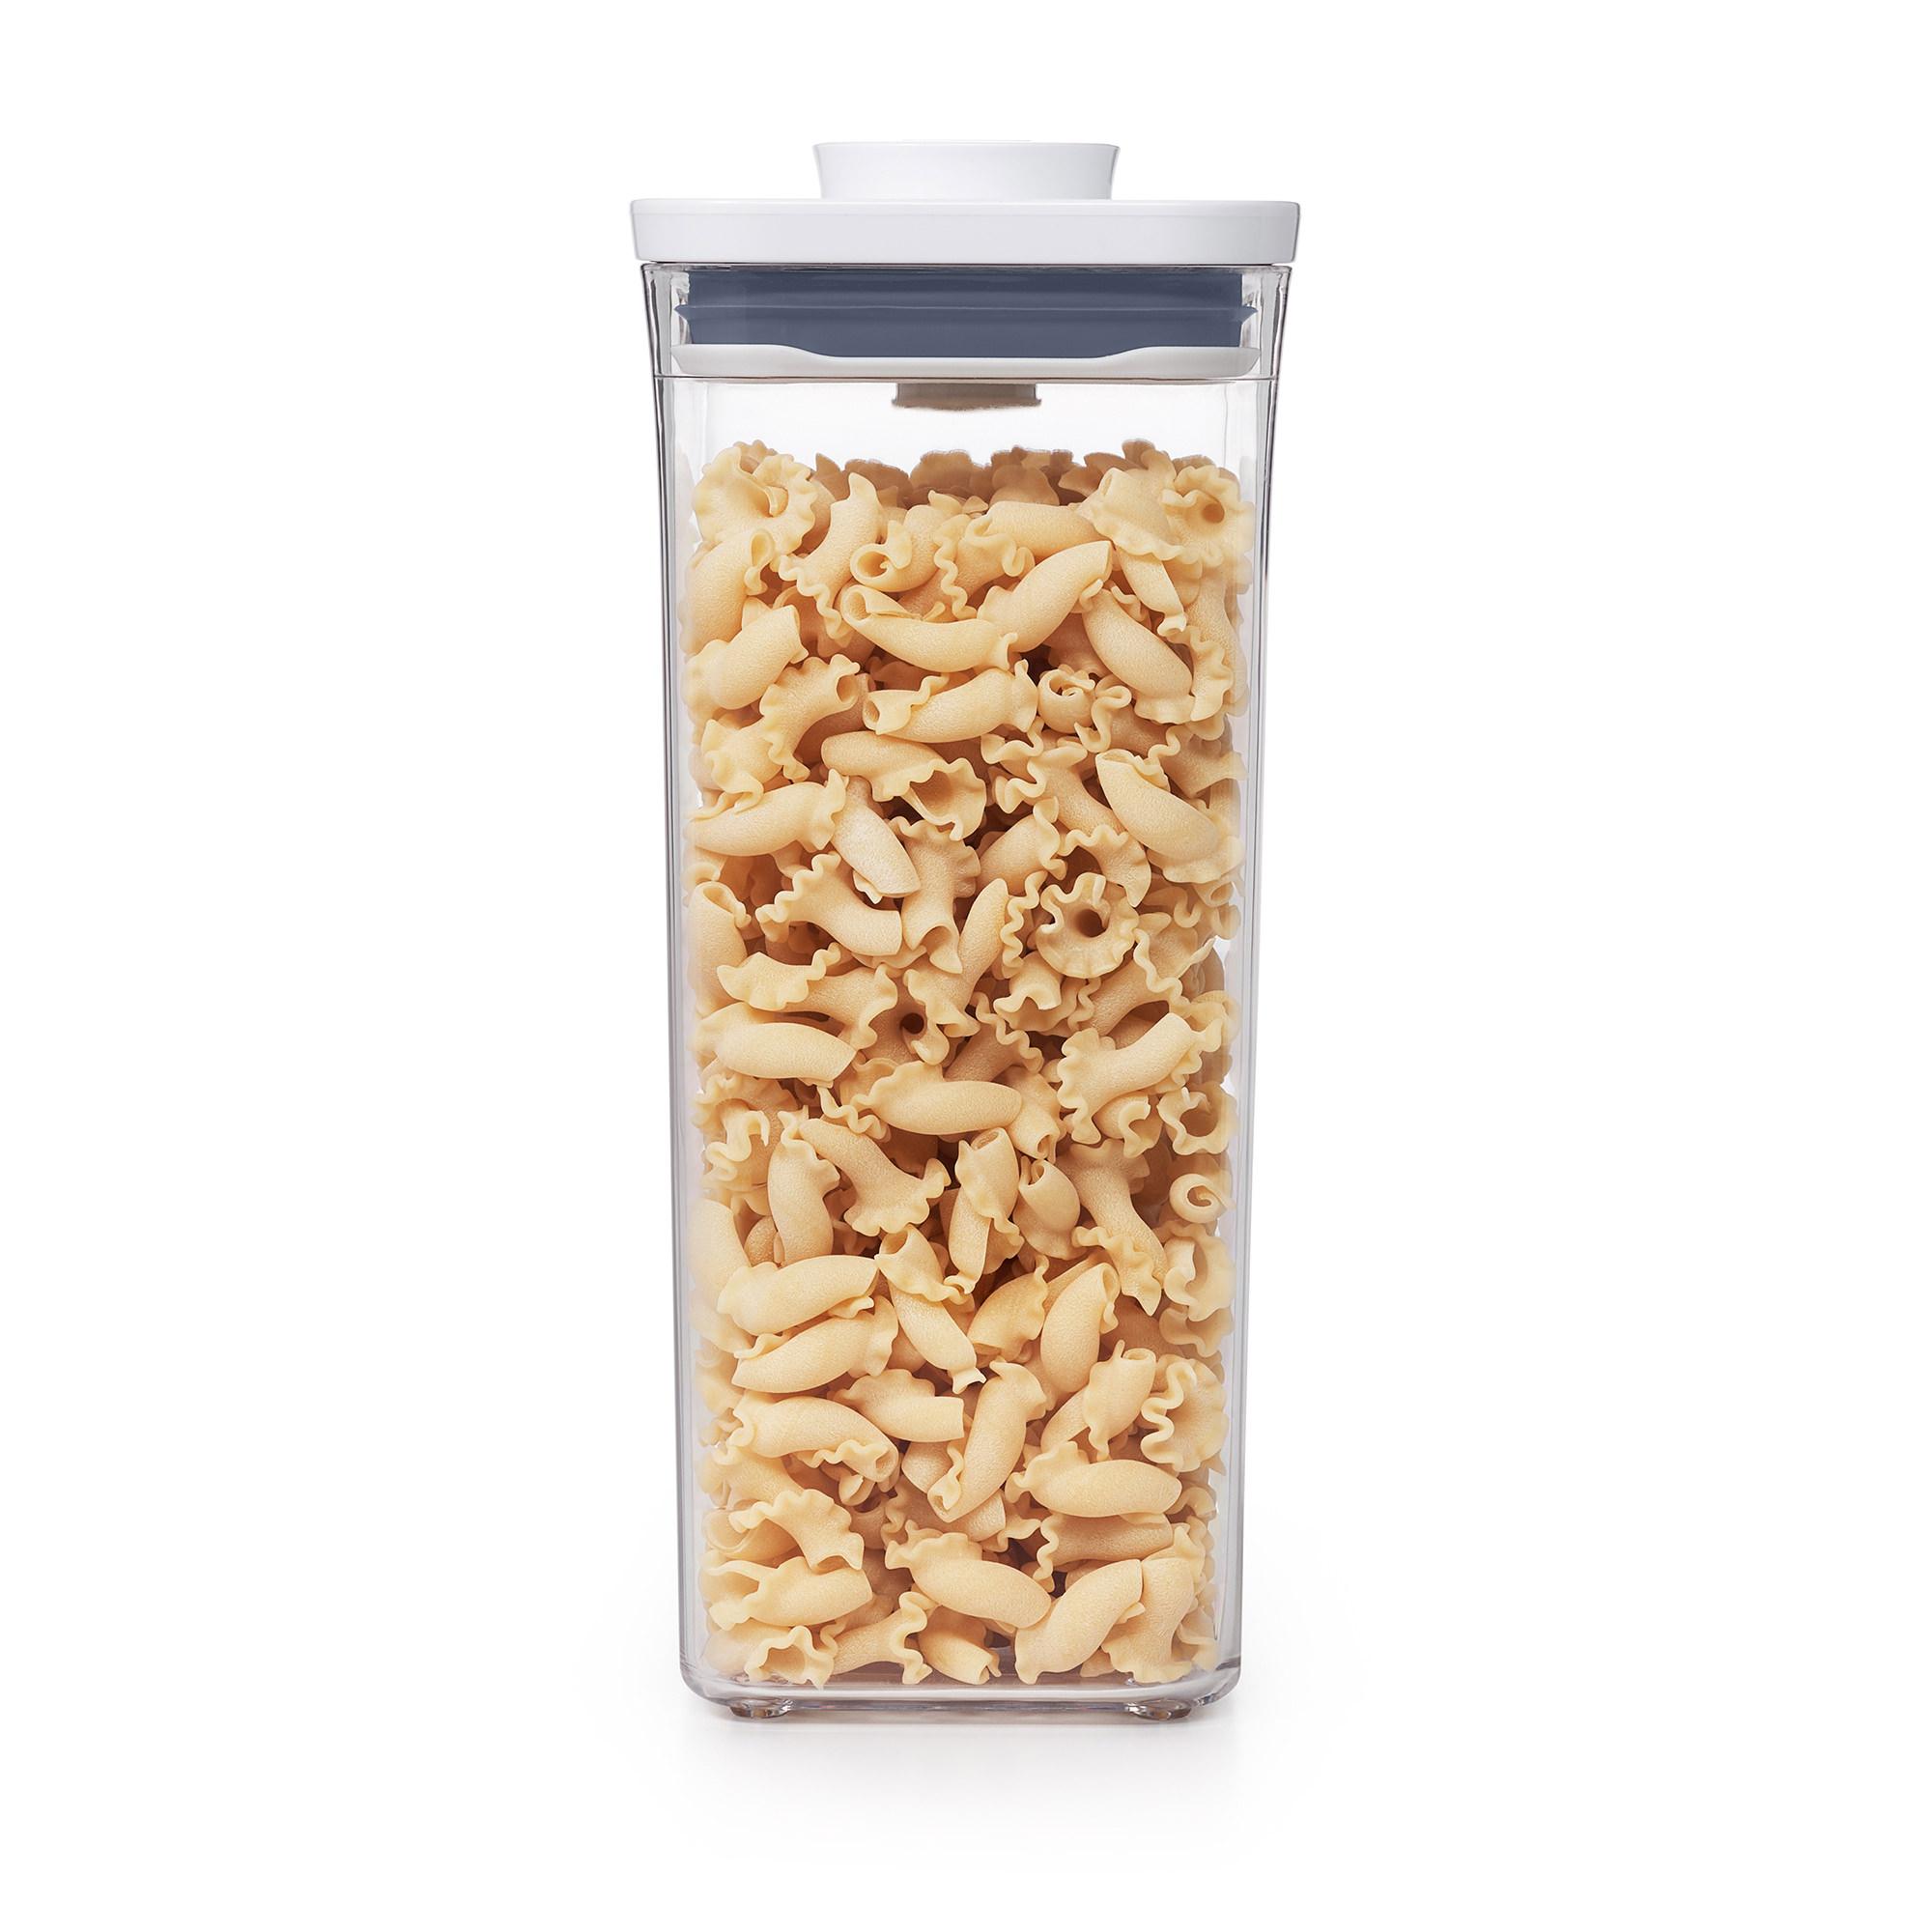 OXO Good Grips Square Pop 2.0 Container 1.6L Image 4